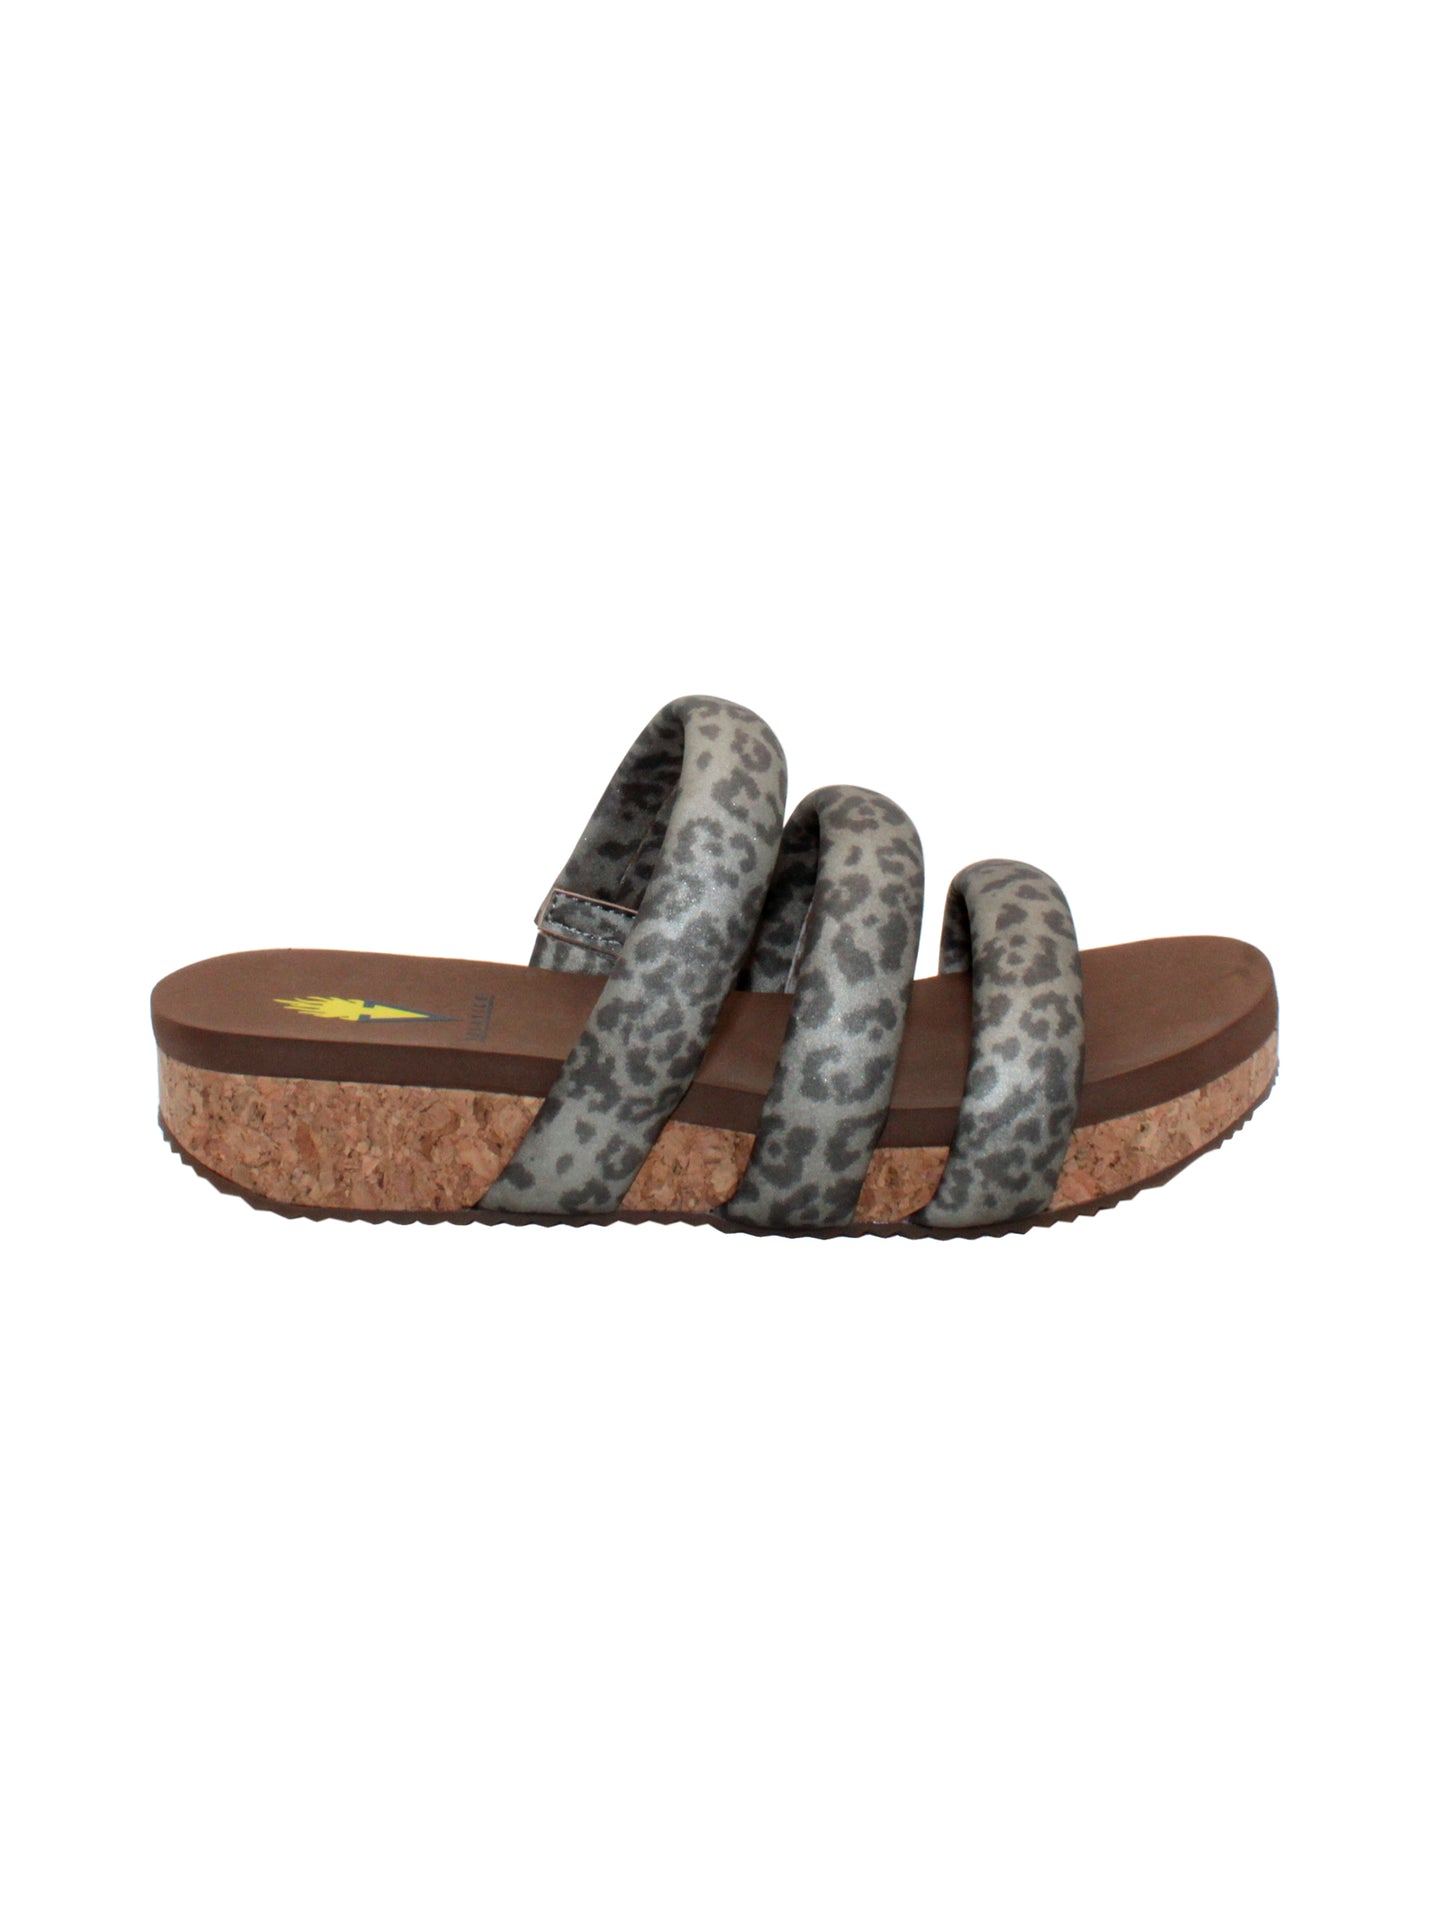 Introduce Volatile's slip-on three band sandal, the 'Gillette' in metallic leopard padded straps. Featuring Volatile’s signature ultra-comfort EVA insole and non-skid, durable rubber traction outsole for all day, elevated ease. Slip them on with everything from jeans to lounge wear.  pewter